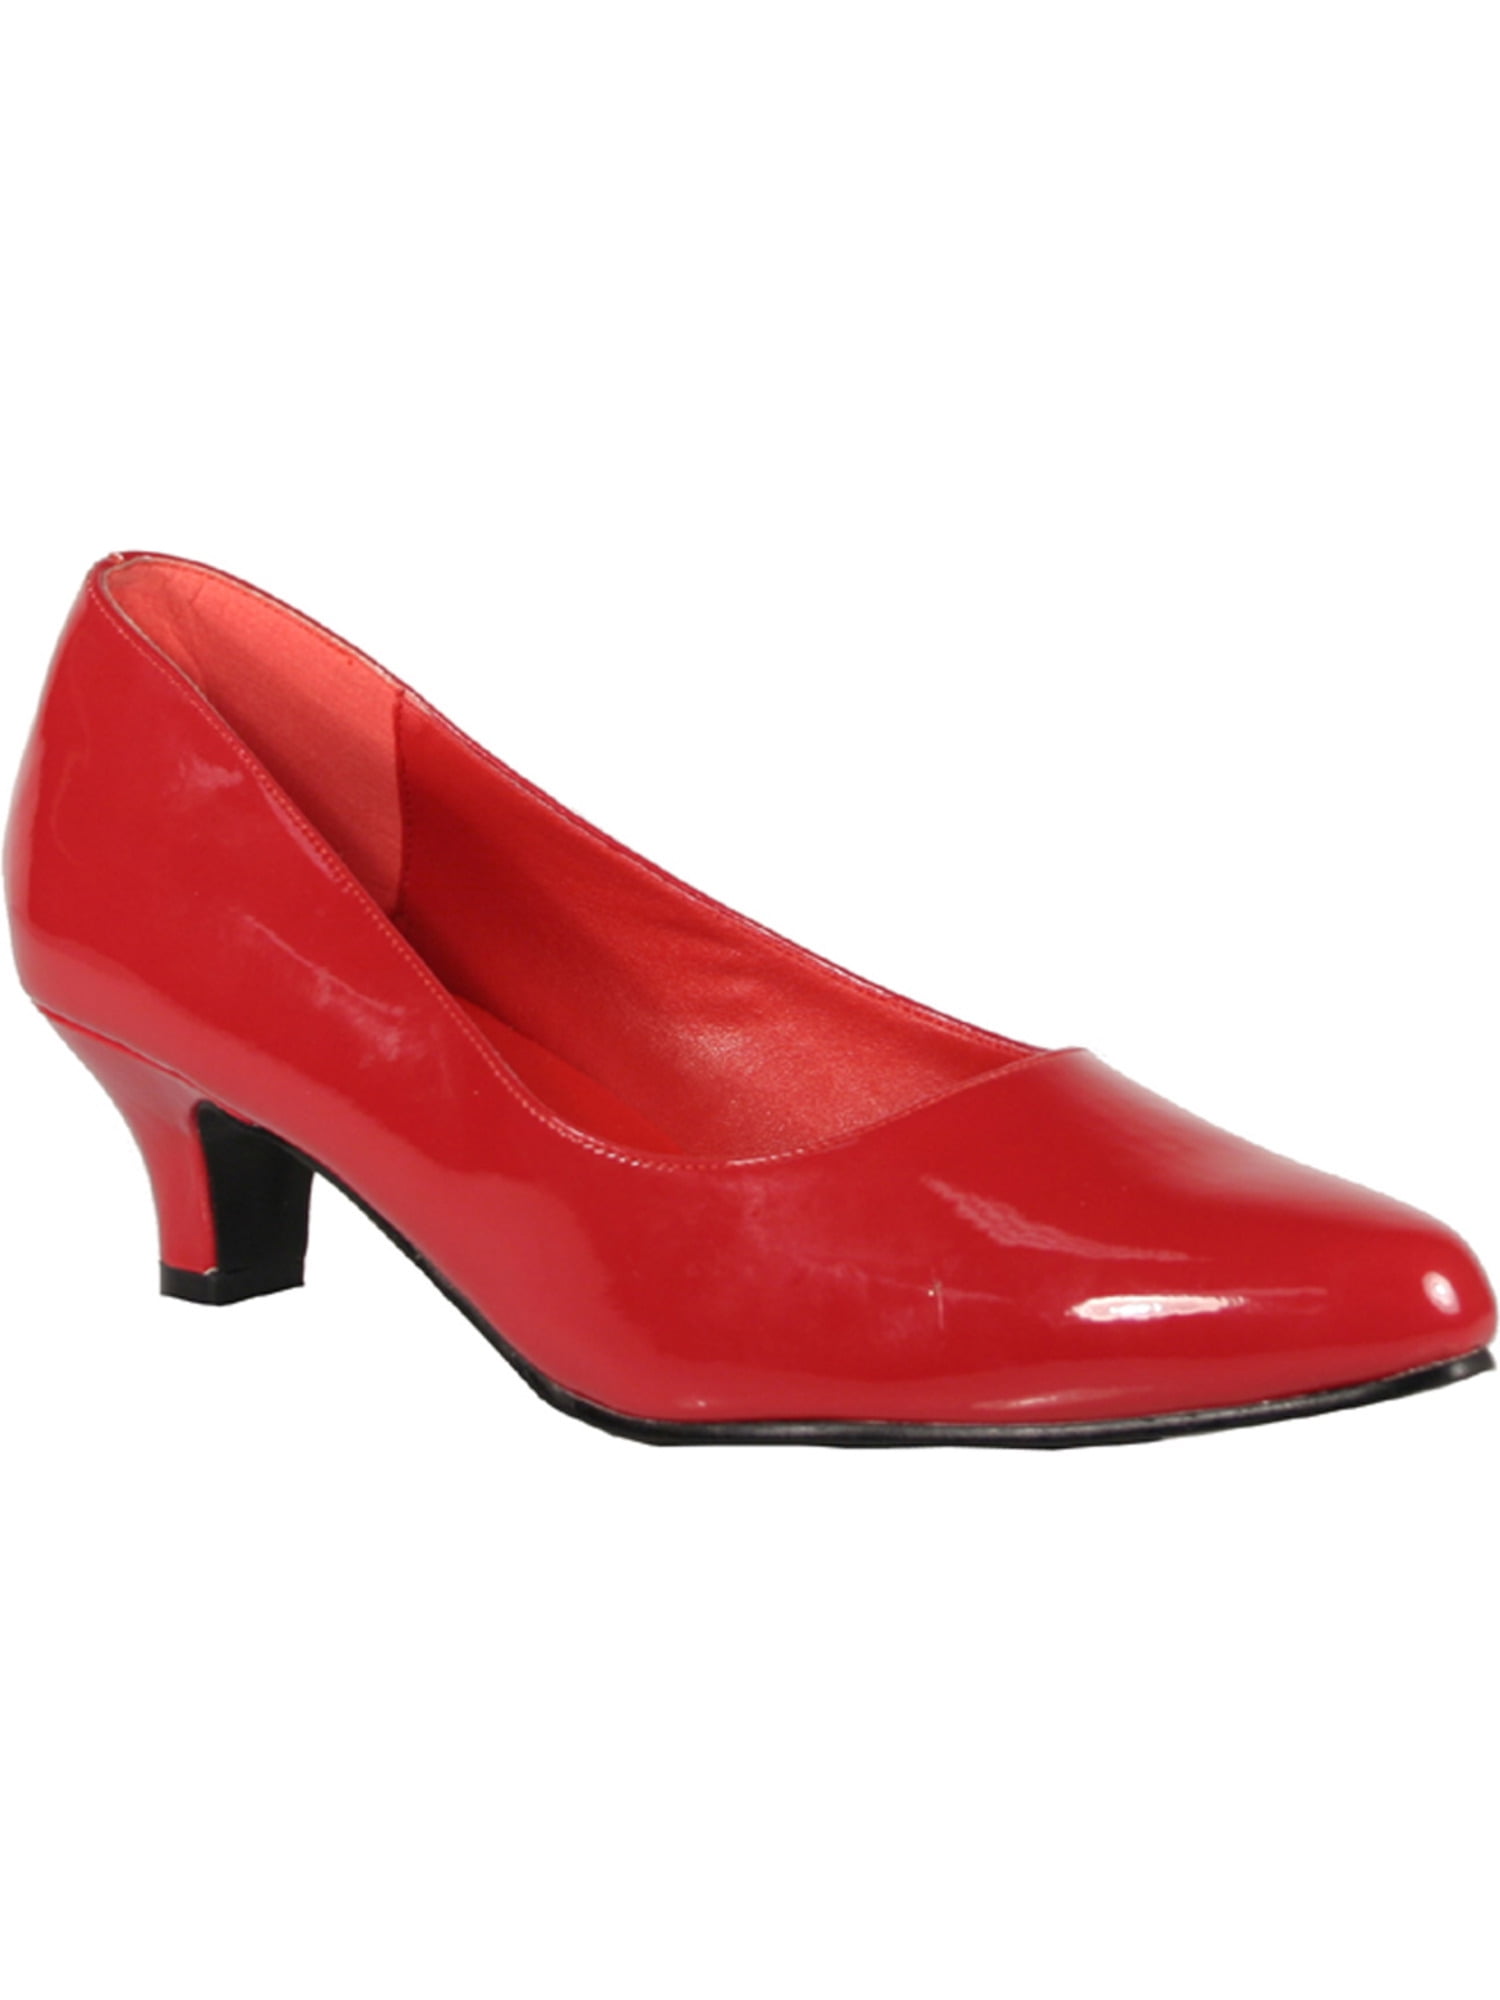 red patent leather kitten heels